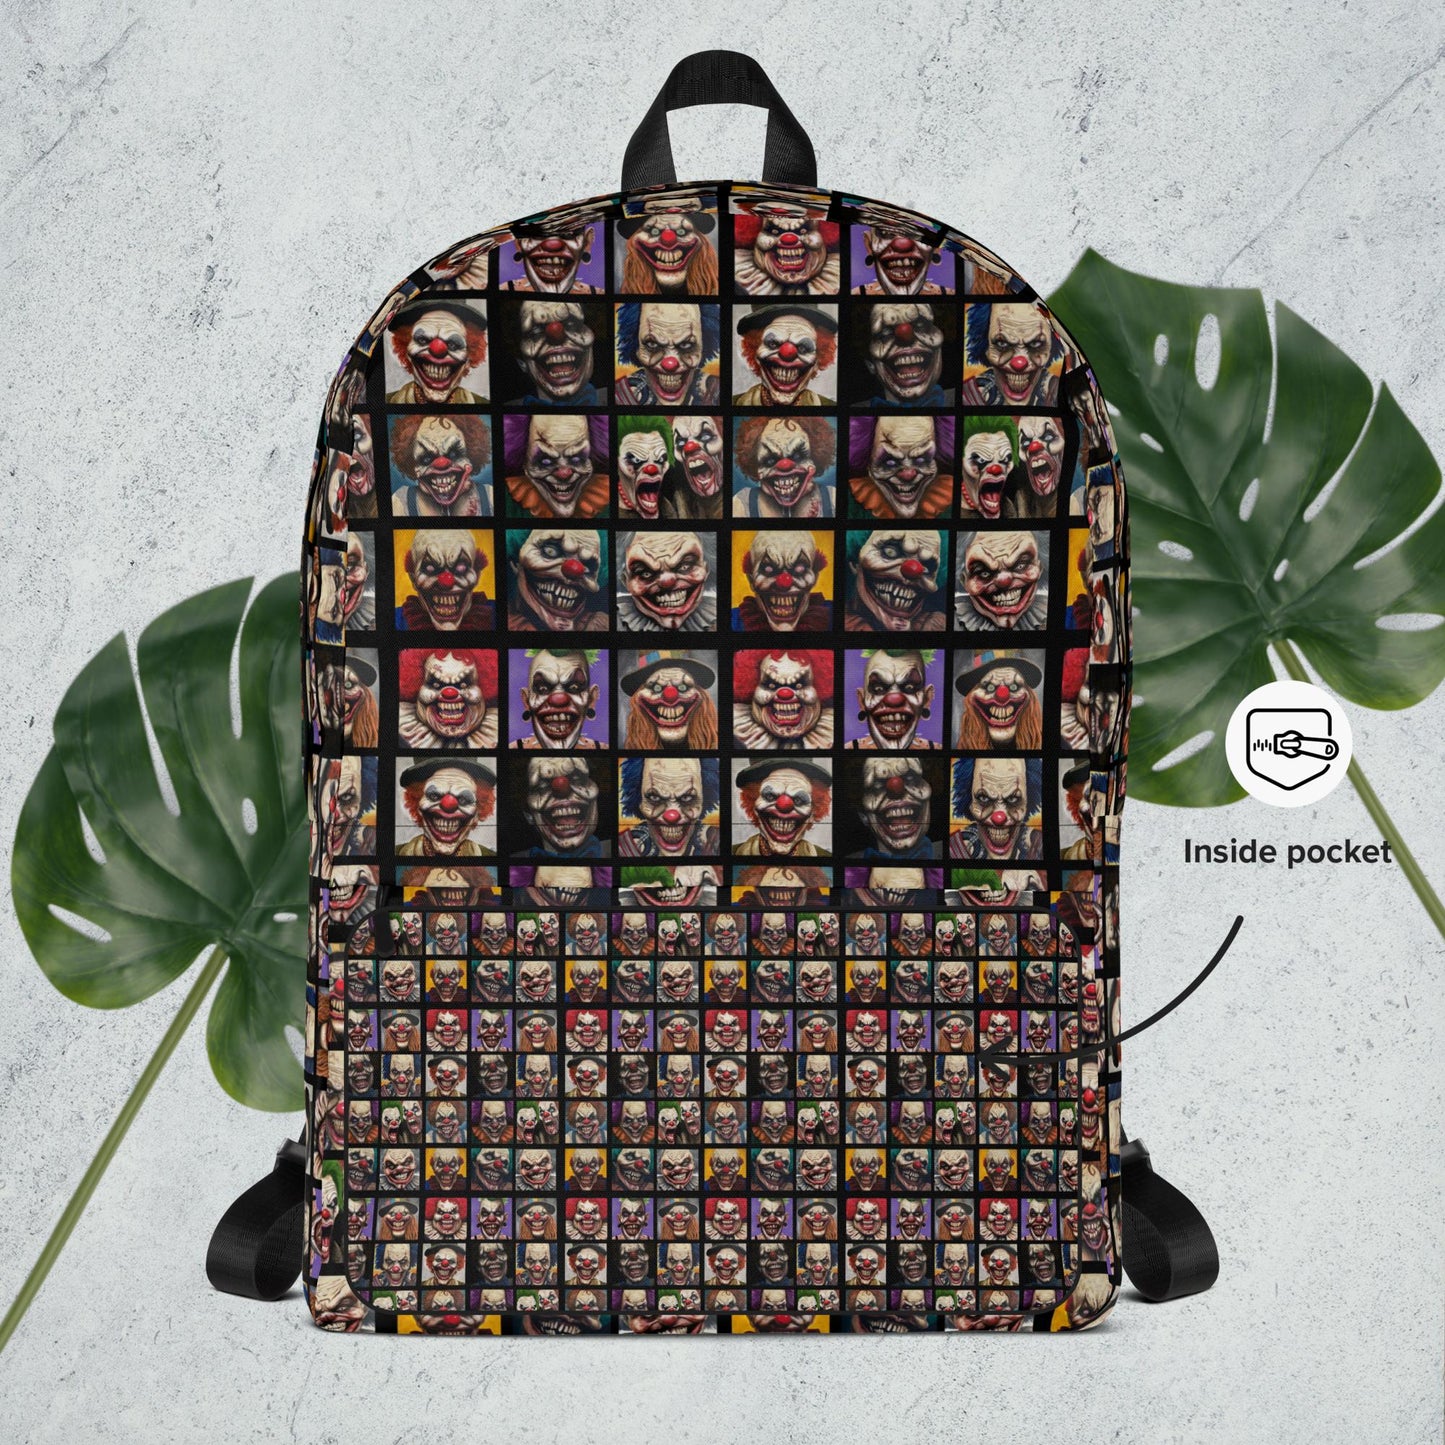 "13 Clowns" Backpack